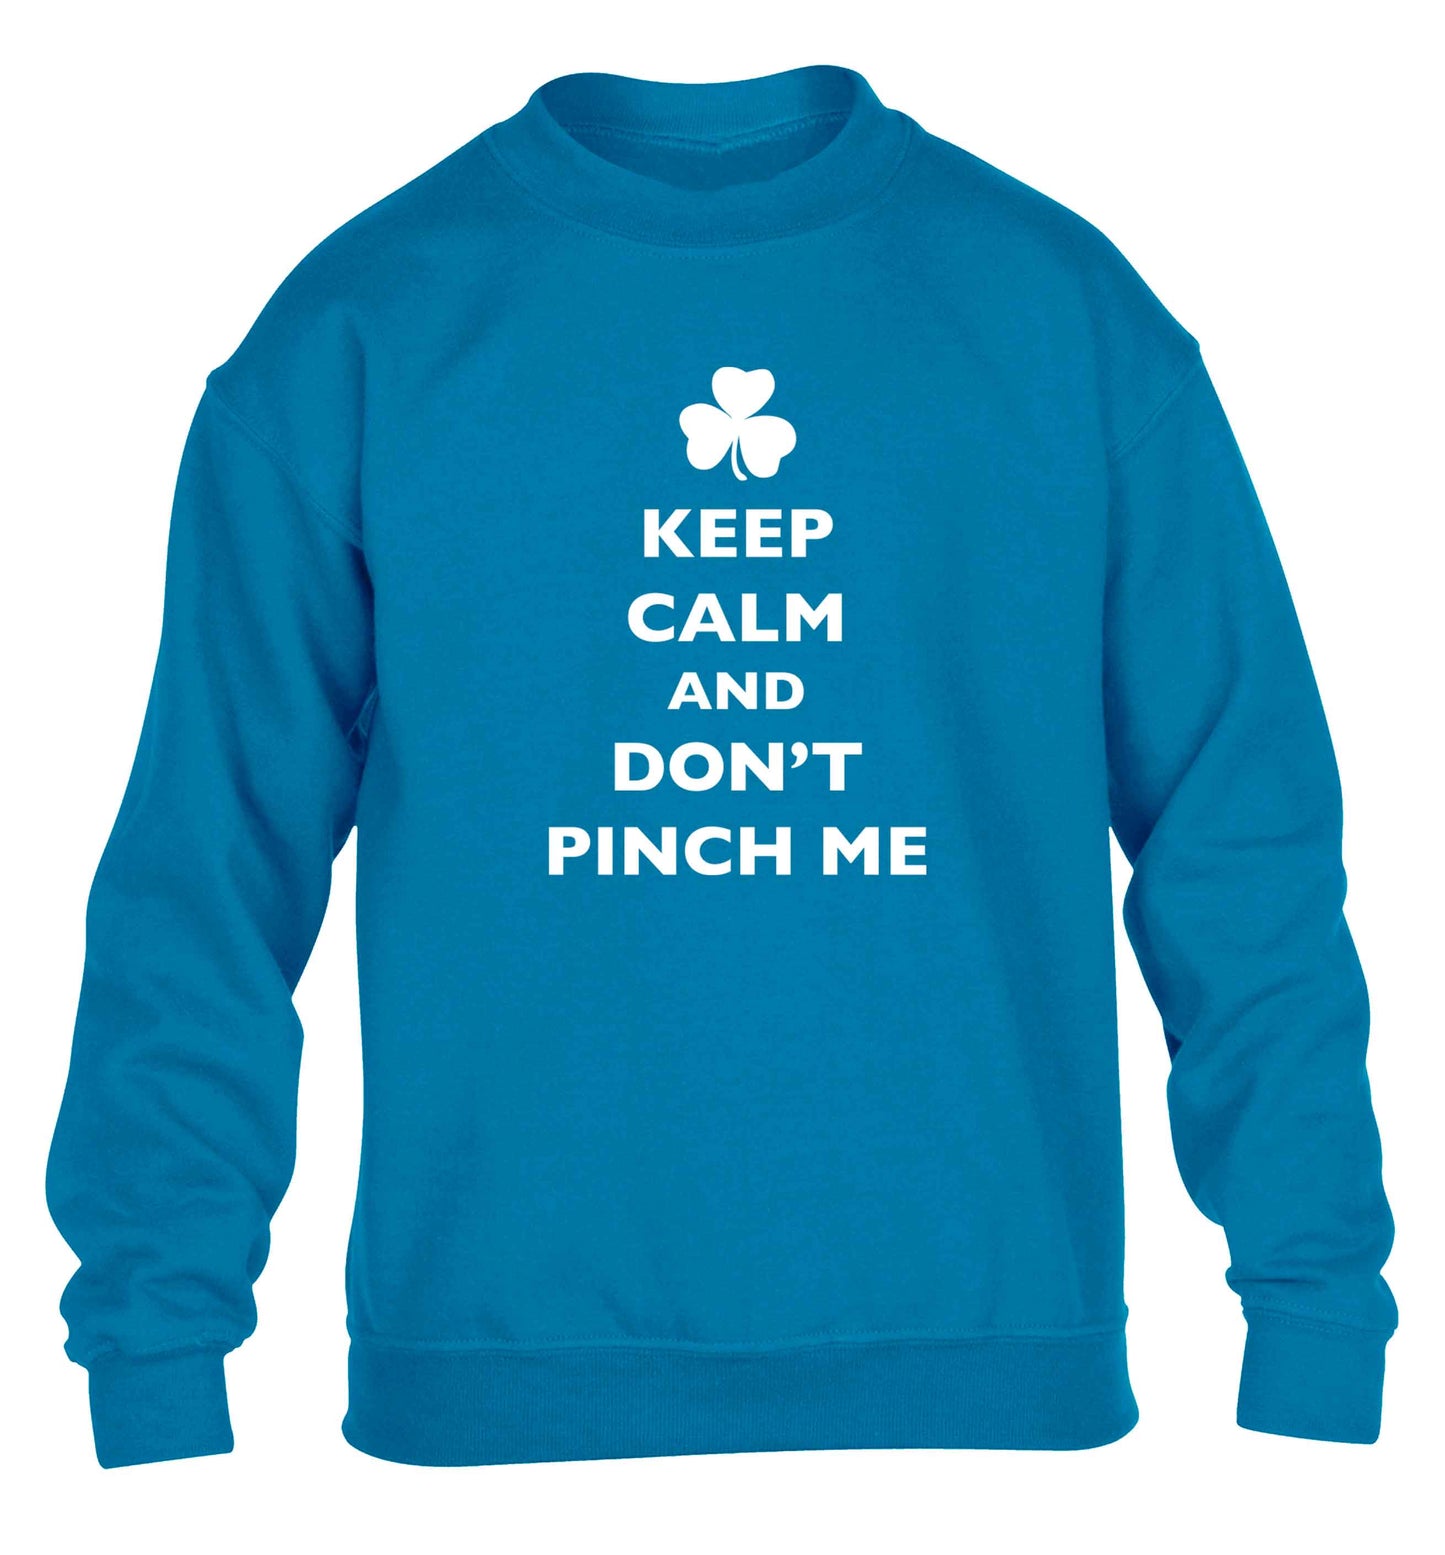 Keep calm and don't pinch me children's blue sweater 12-13 Years